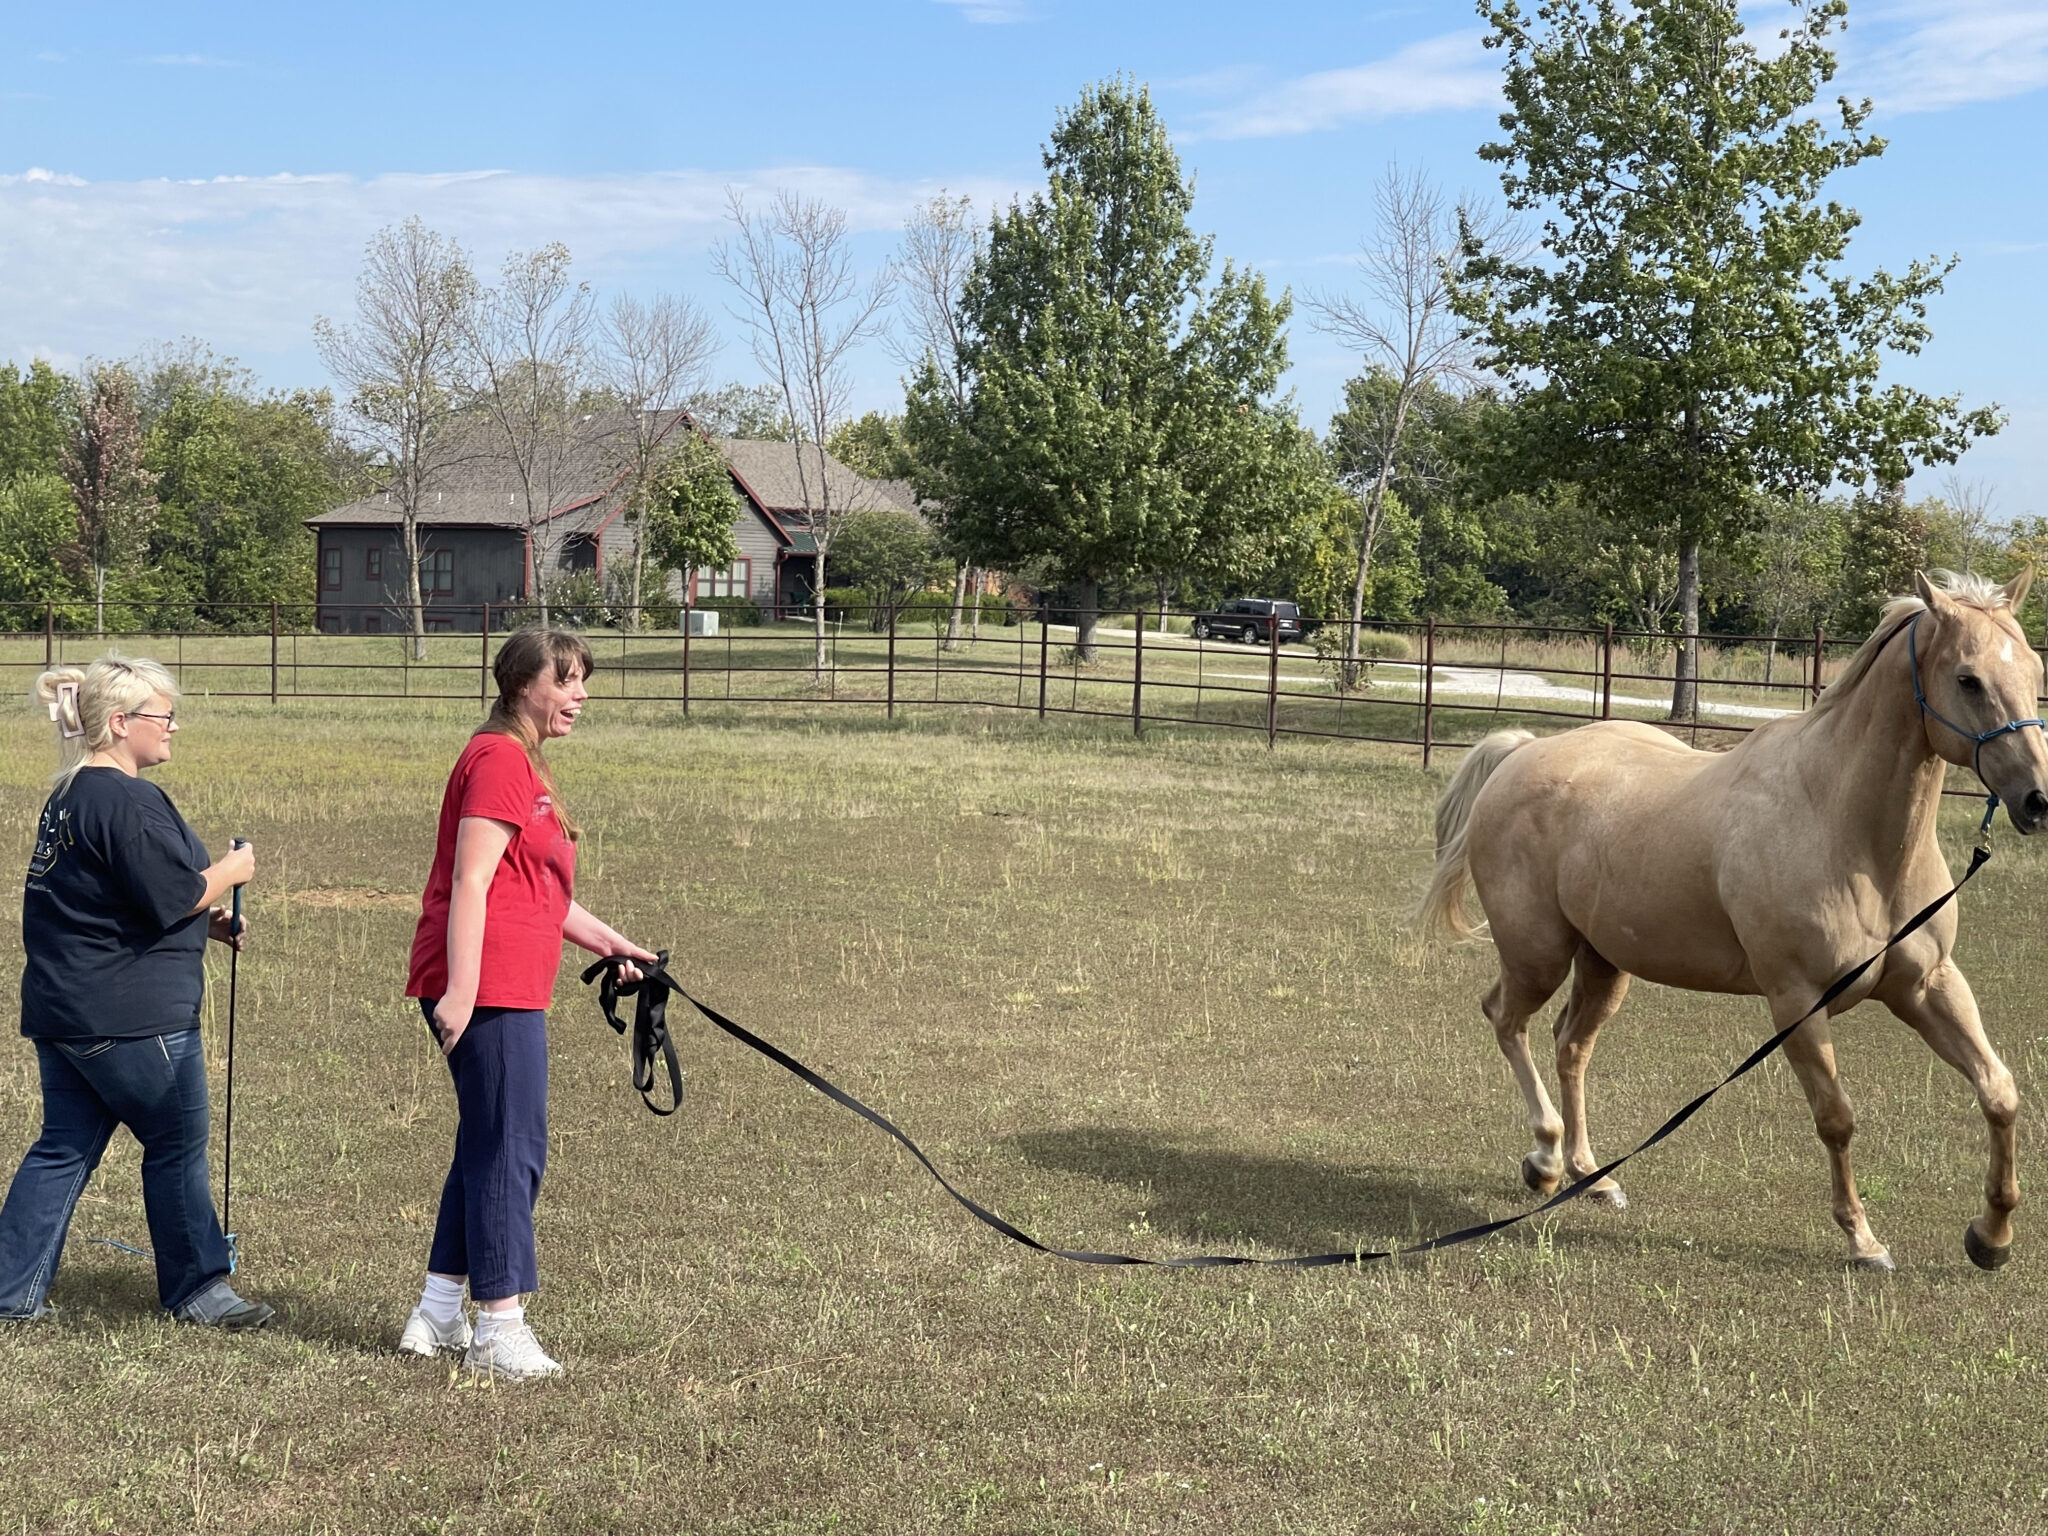 Cheyene and MNF staff spend time with a horse